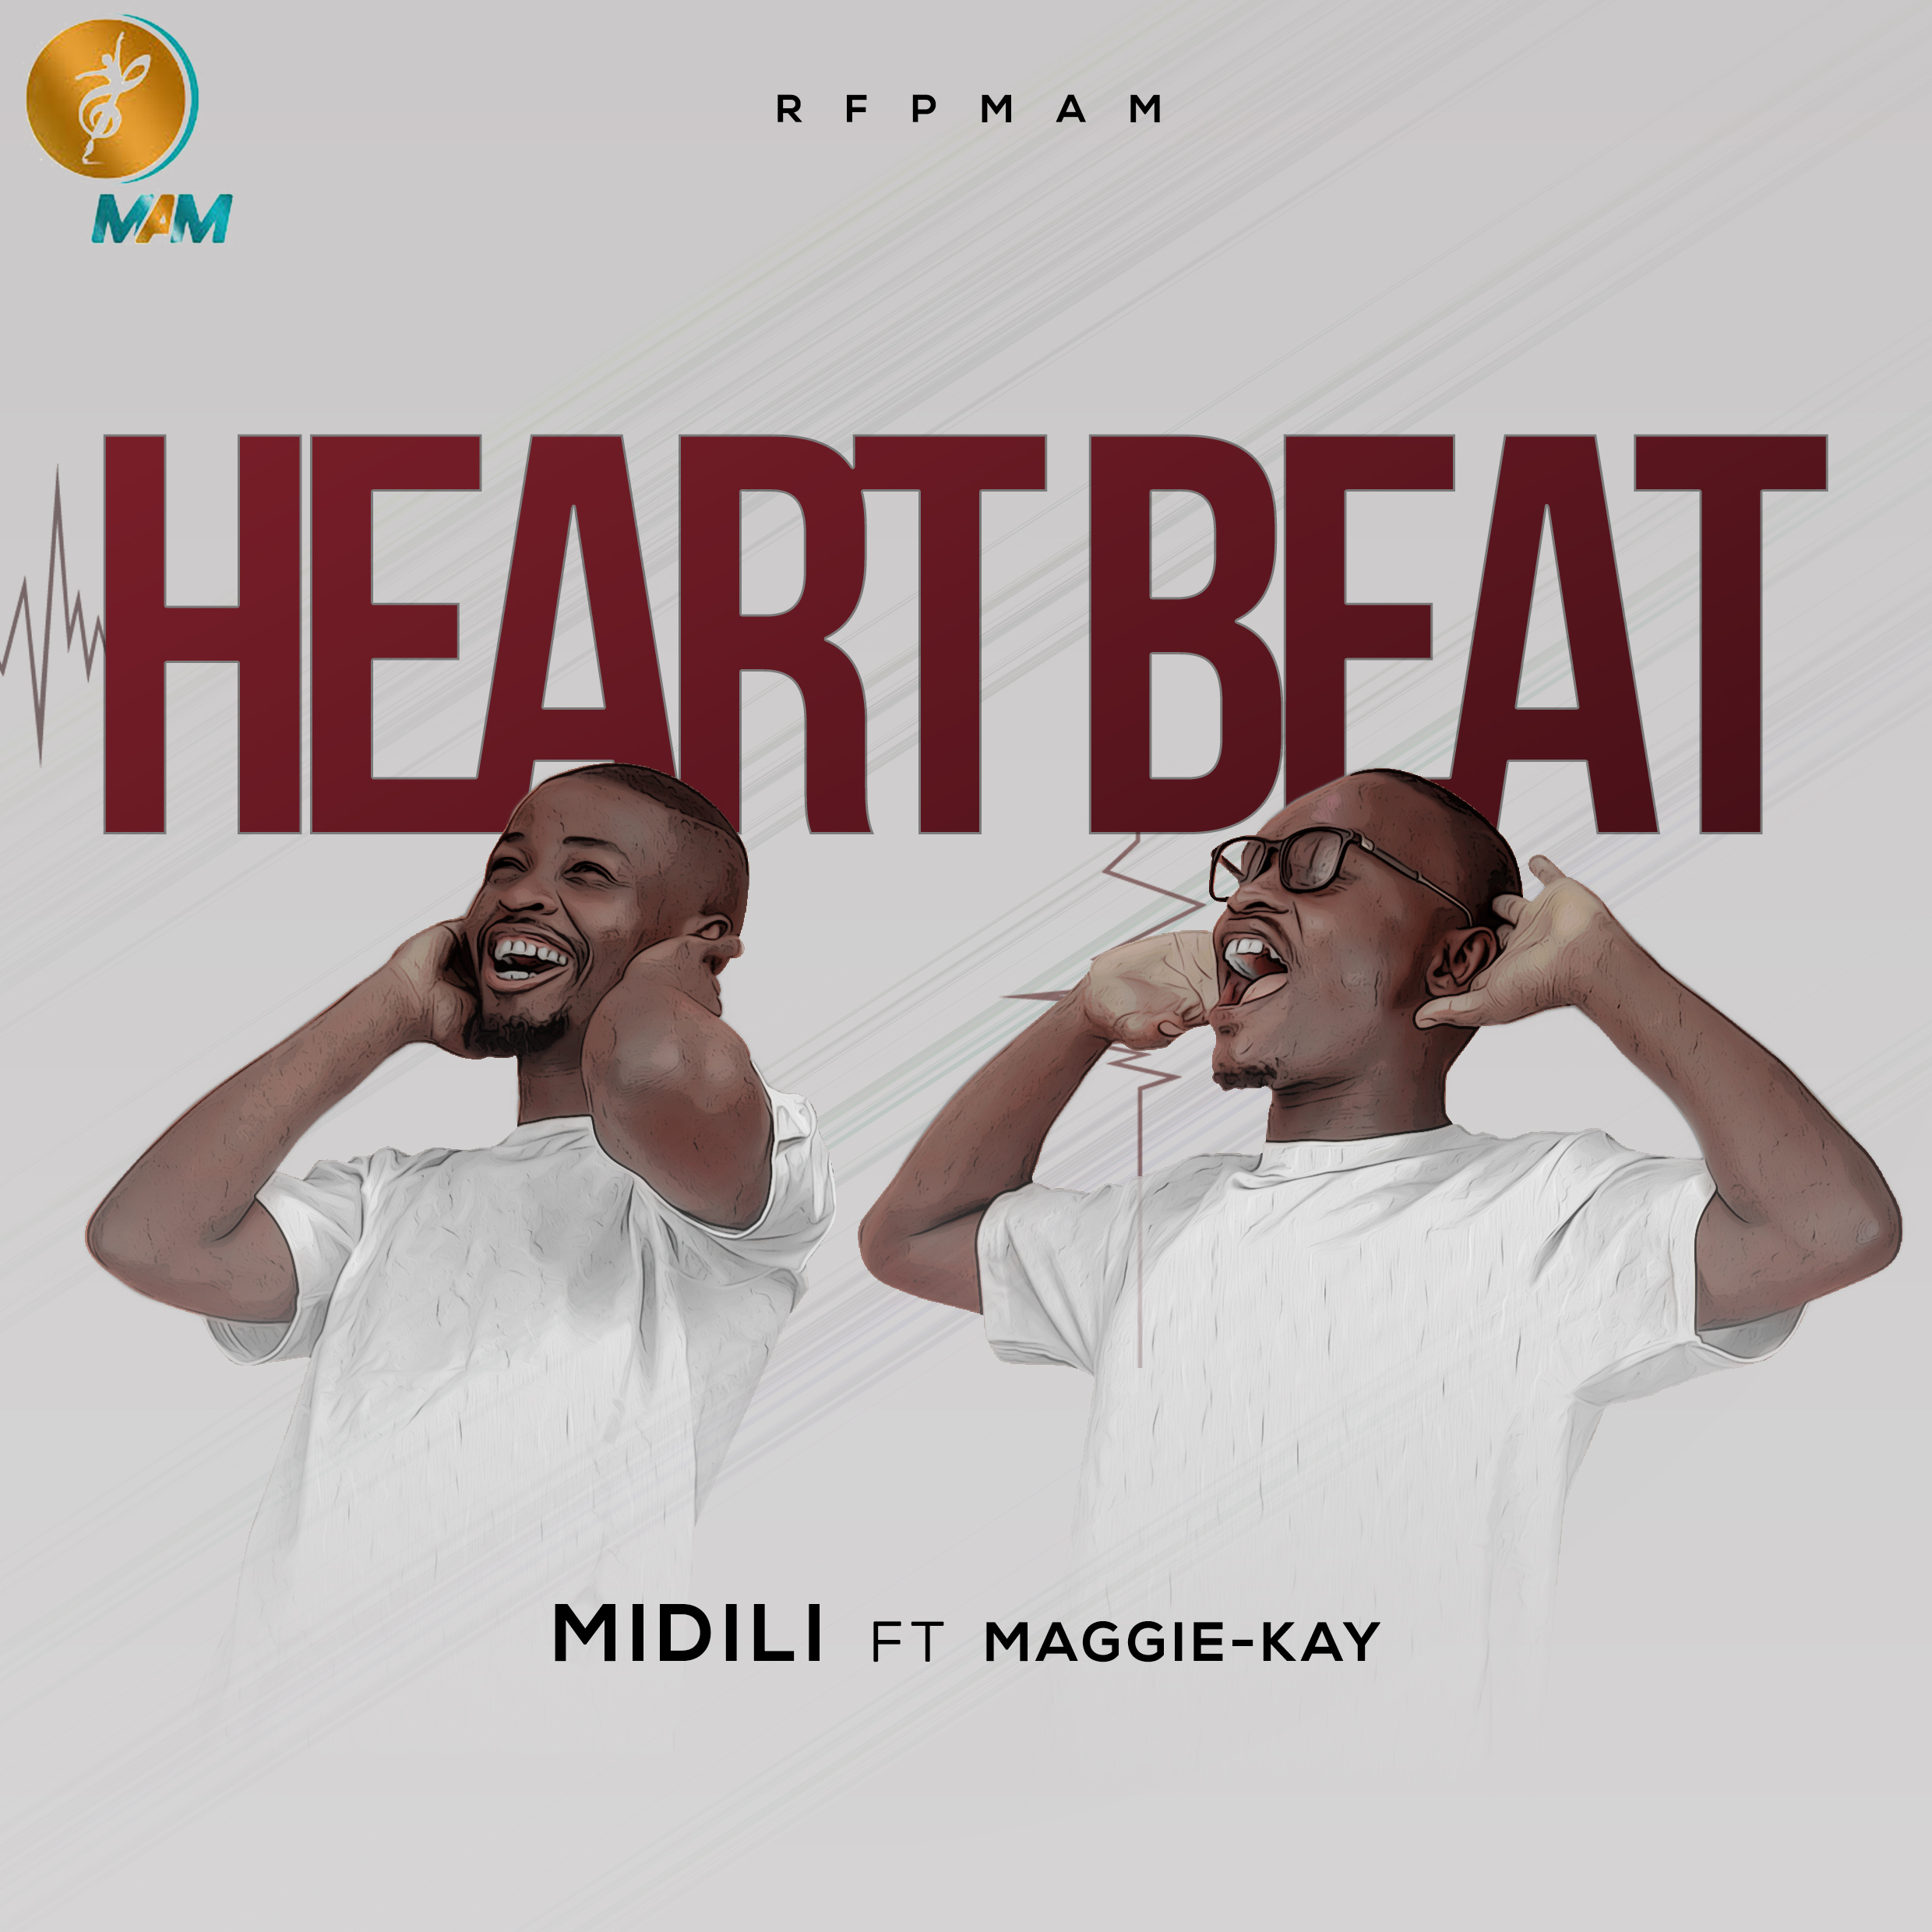  [Music Download] MIDILI – HeartBeat Ft Maggie Kay